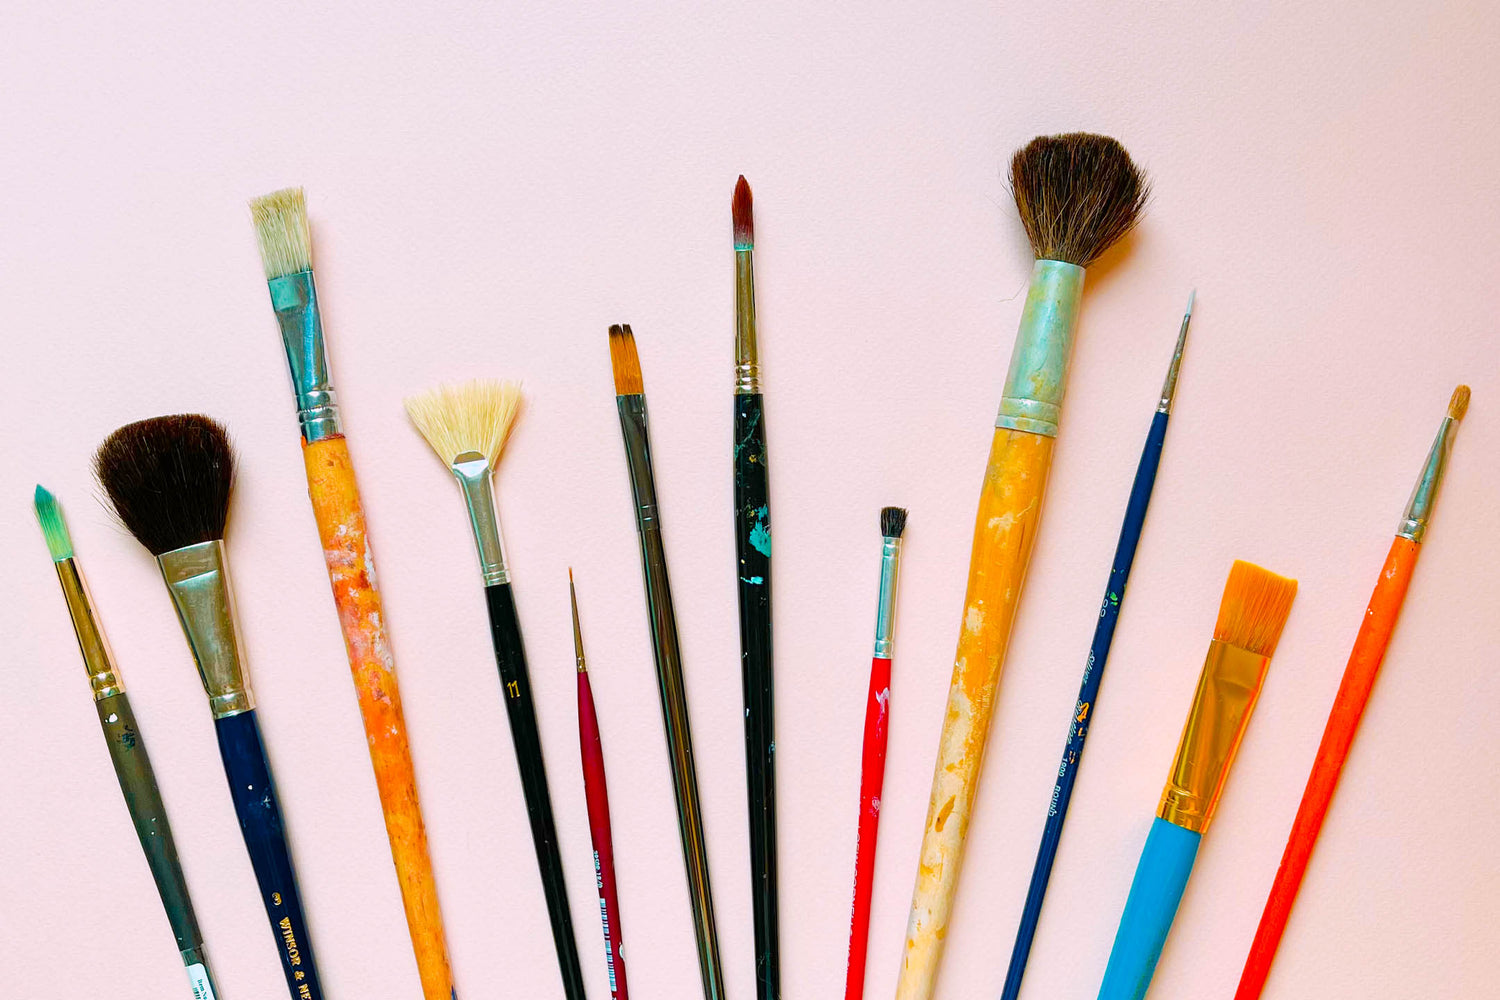 How to clean paintbrushes